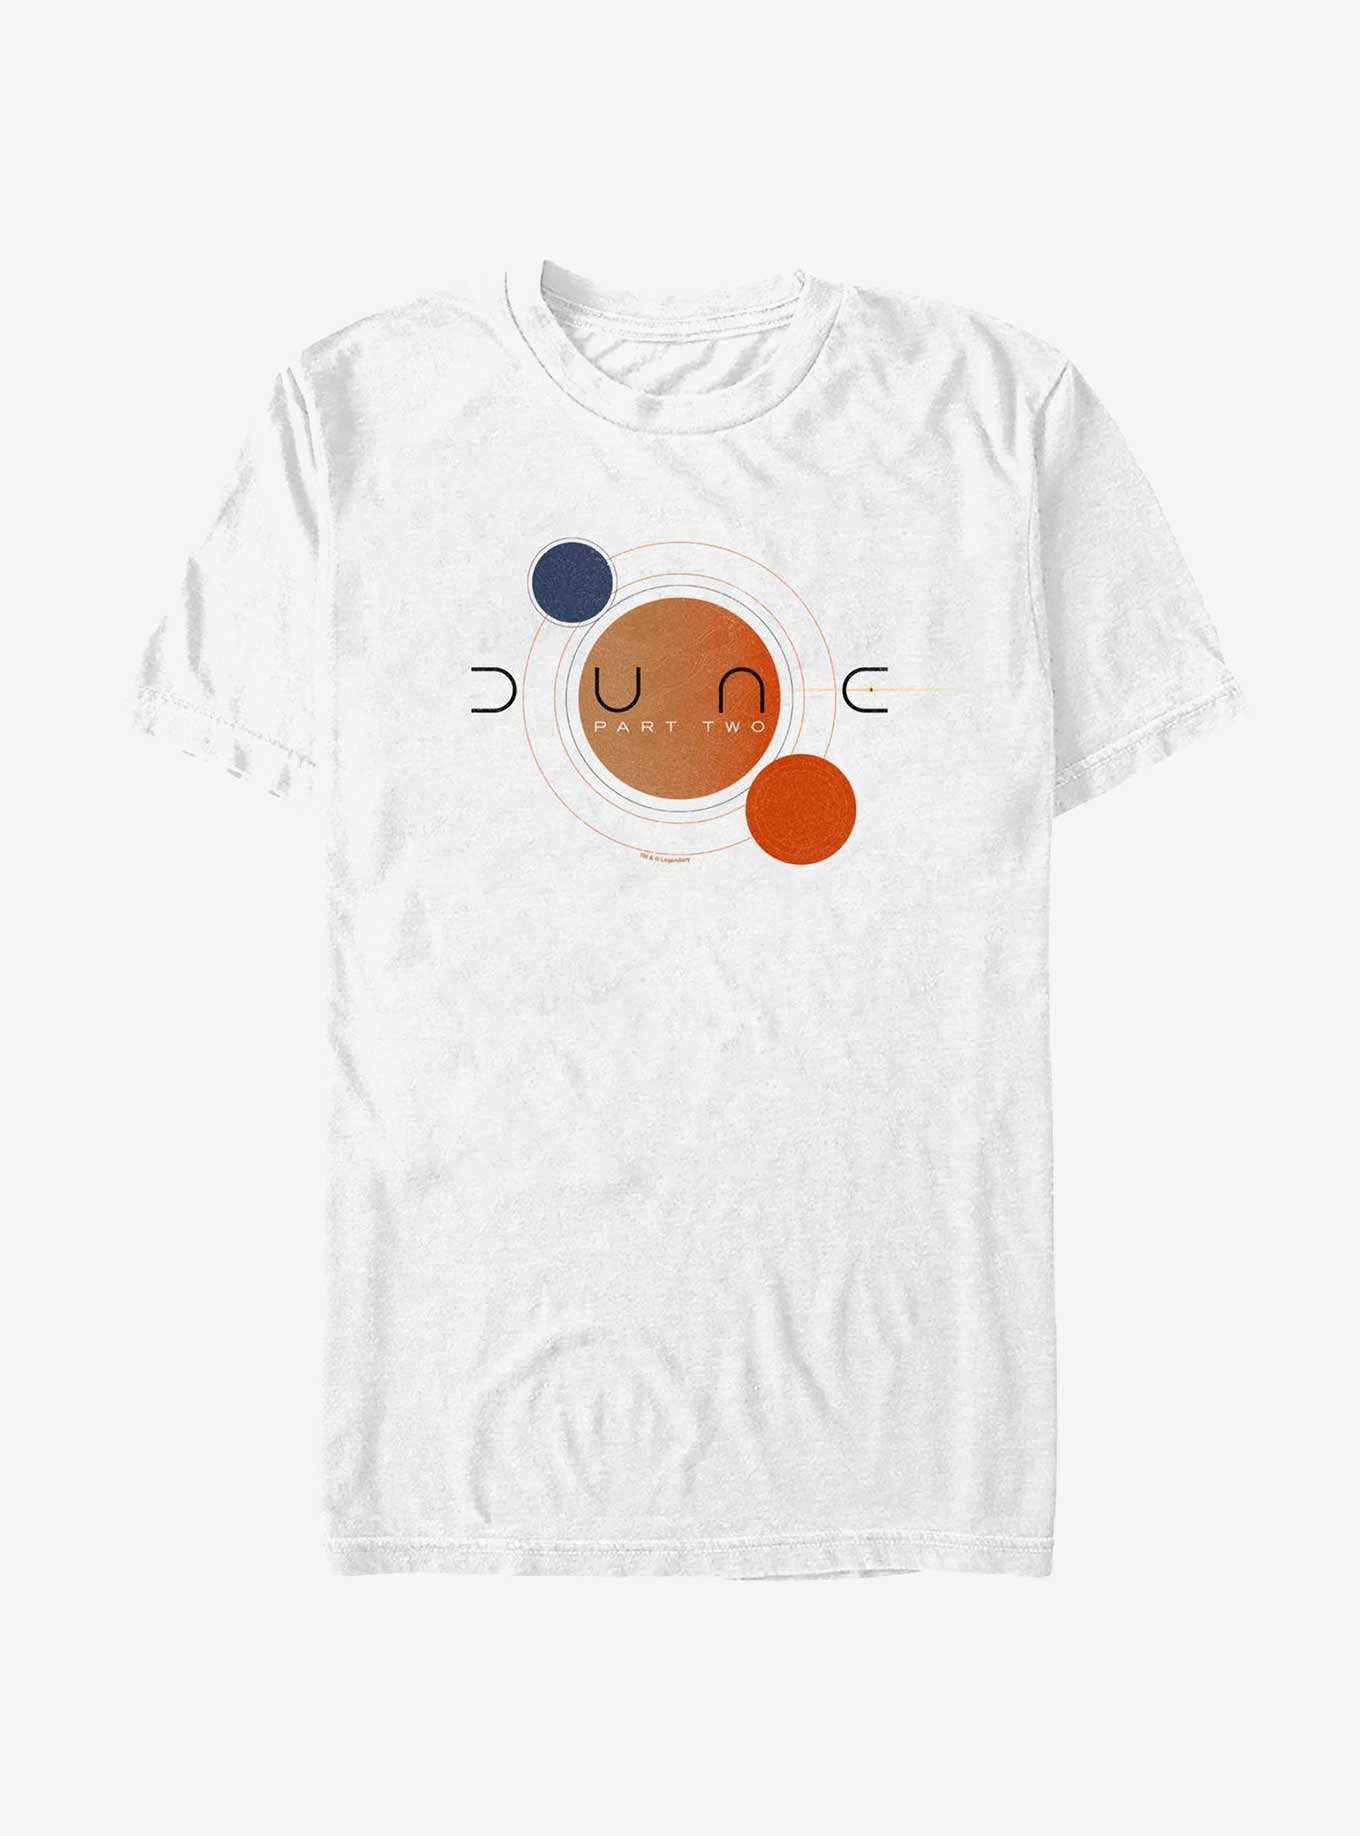 Dune: Part Two Planet System T-Shirt, , hi-res